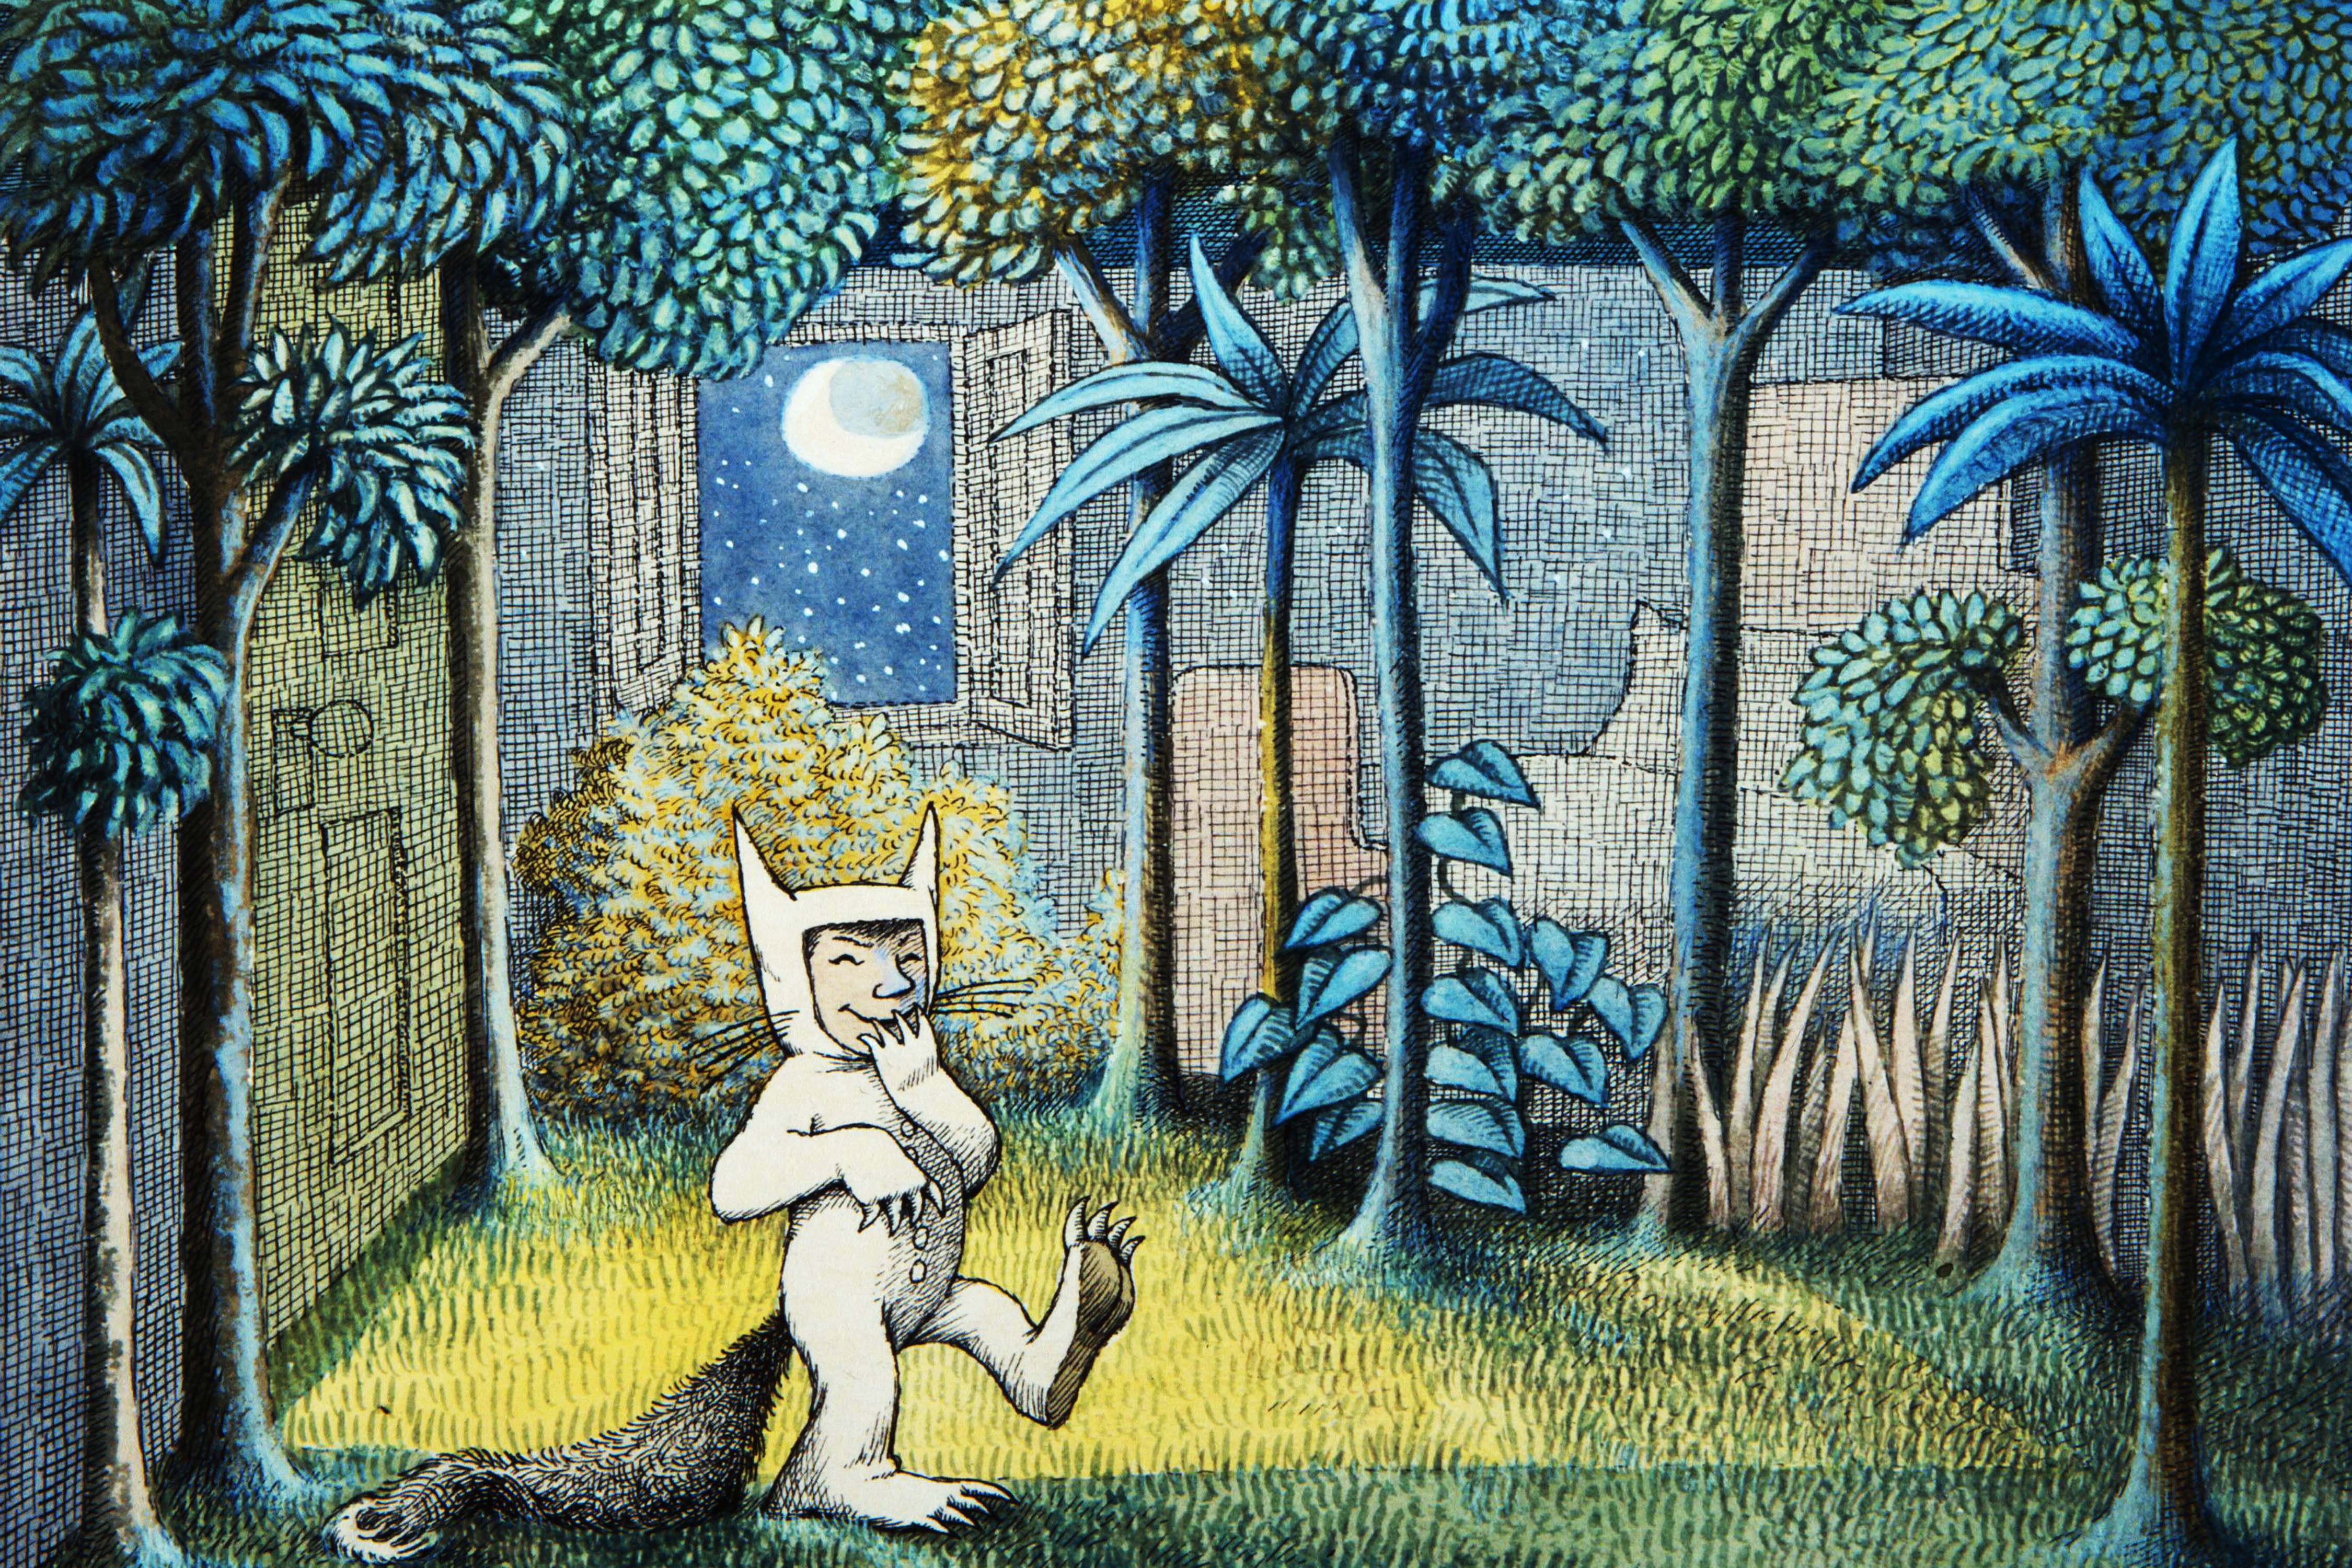 Where The Wild Things Are #15